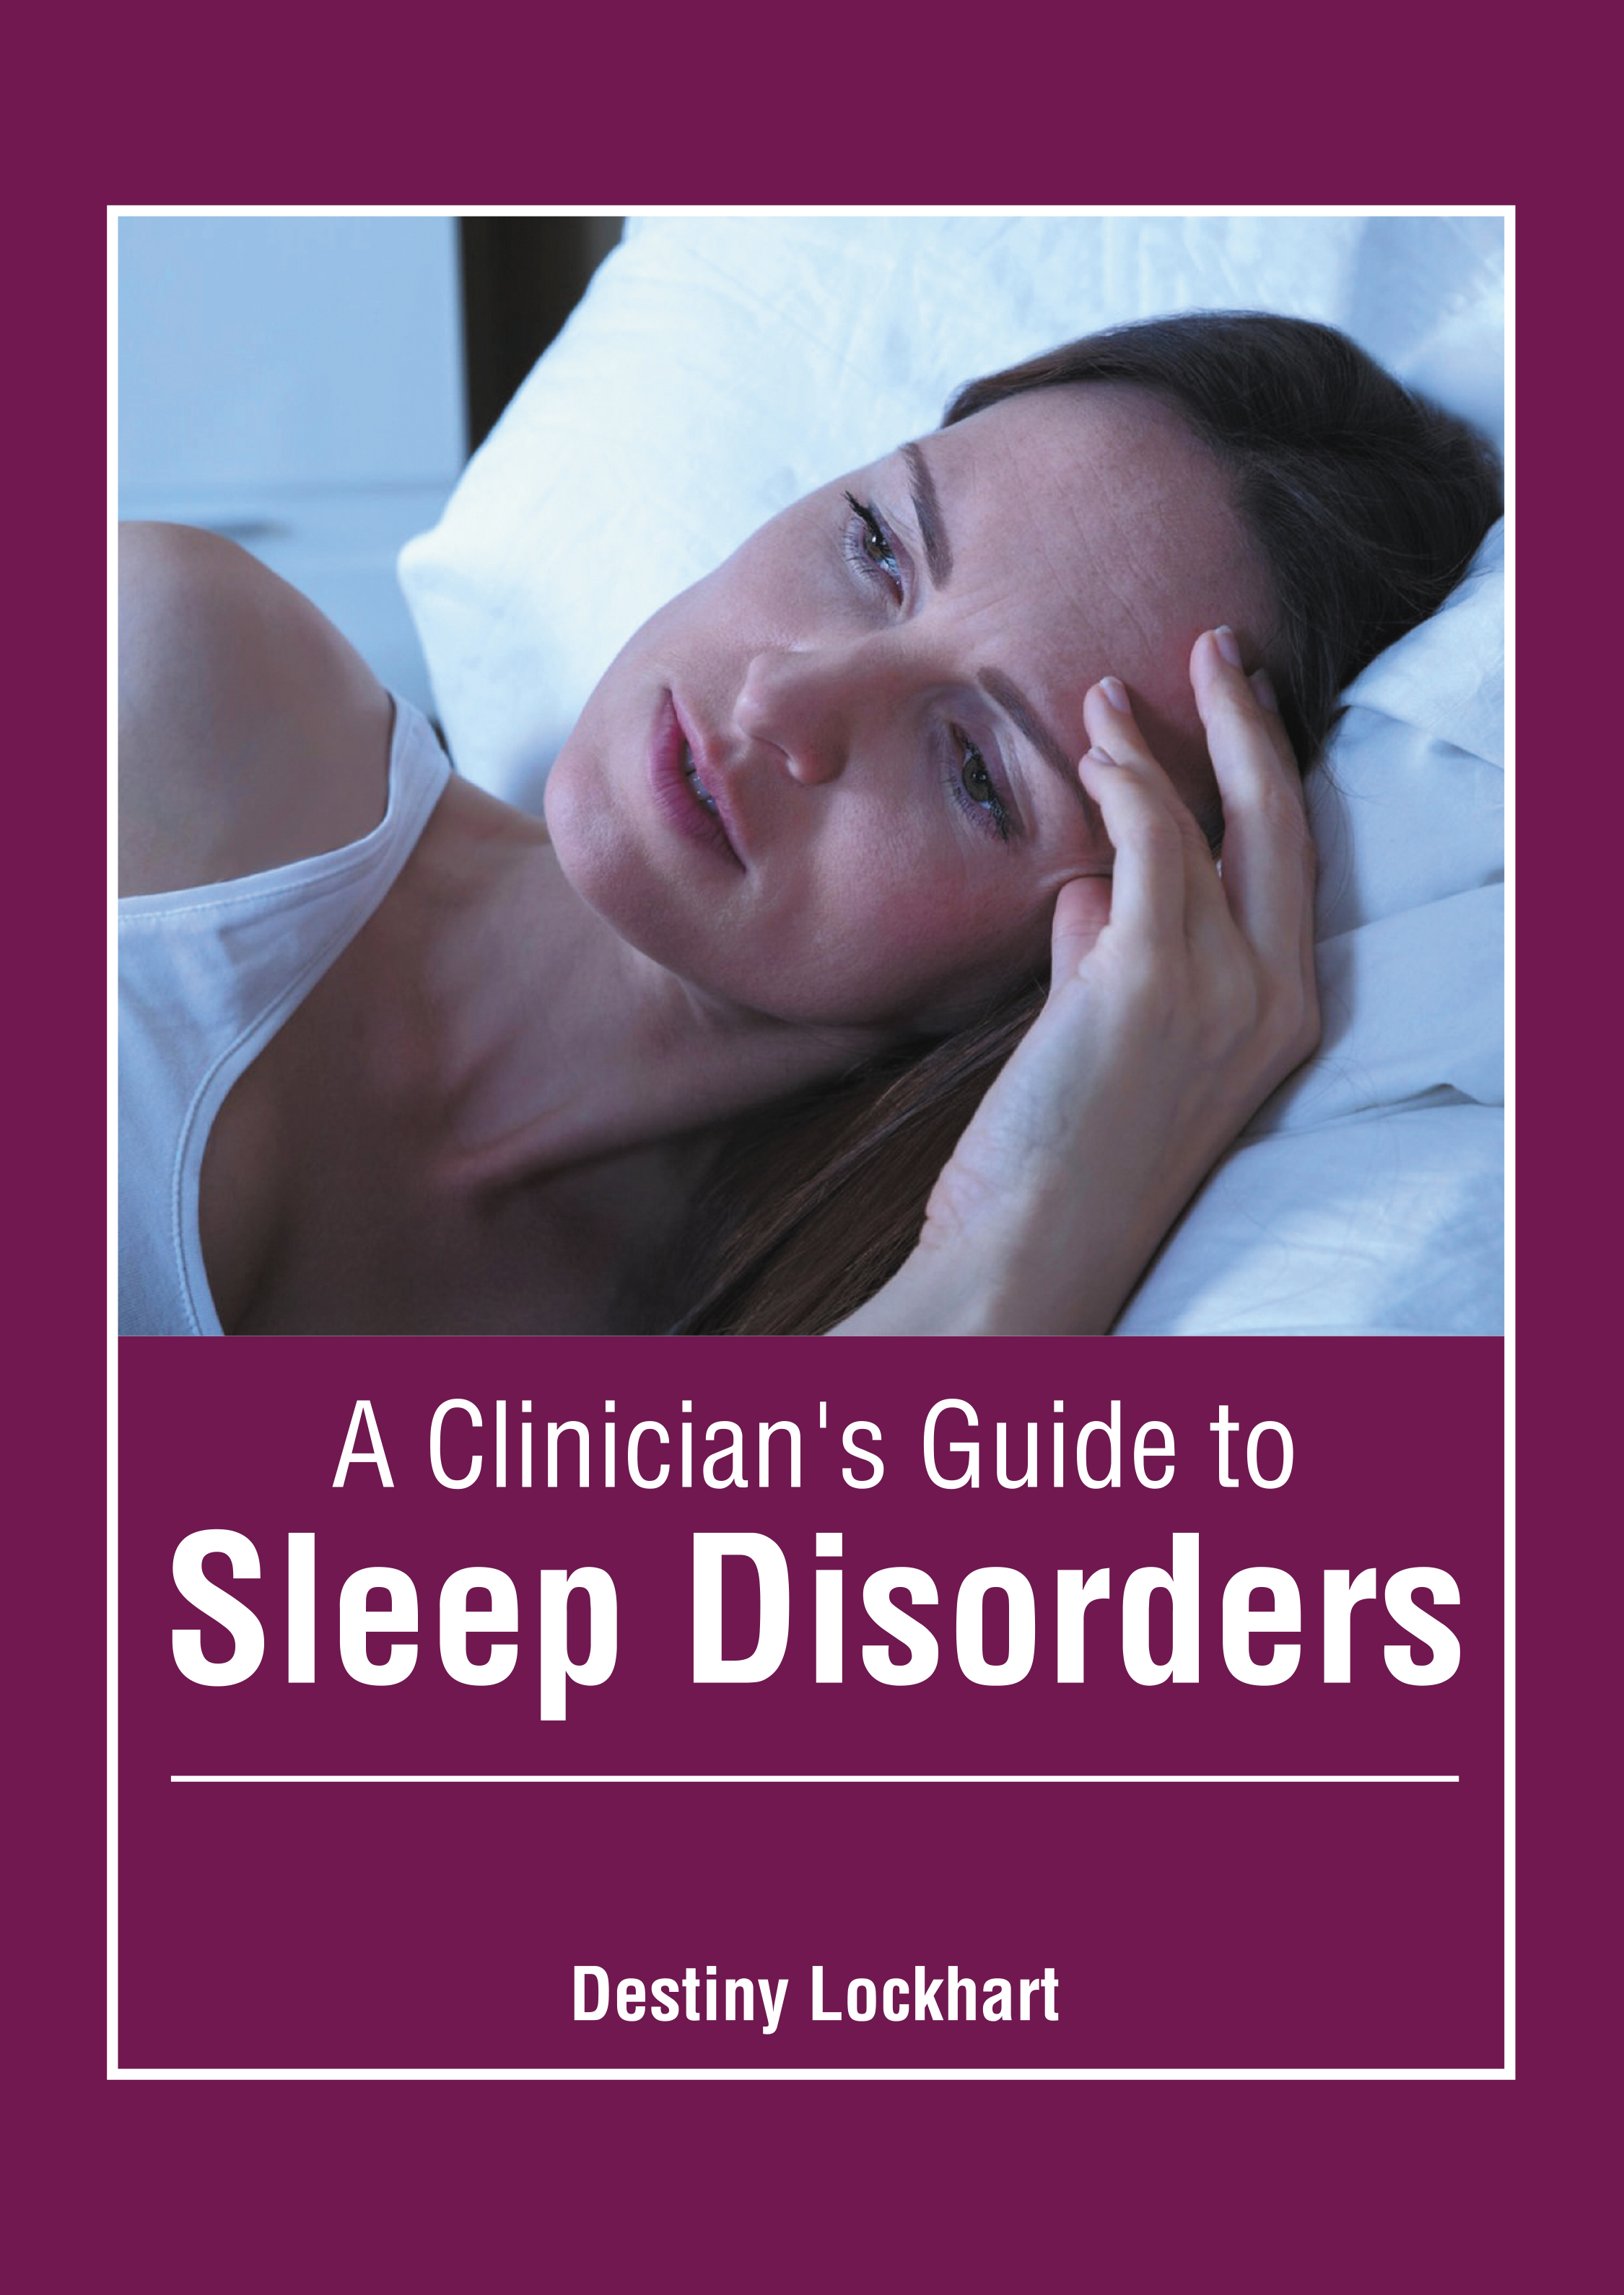 A CLINICIAN'S GUIDE TO SLEEP DISORDERS | ISBN: 9781639270873